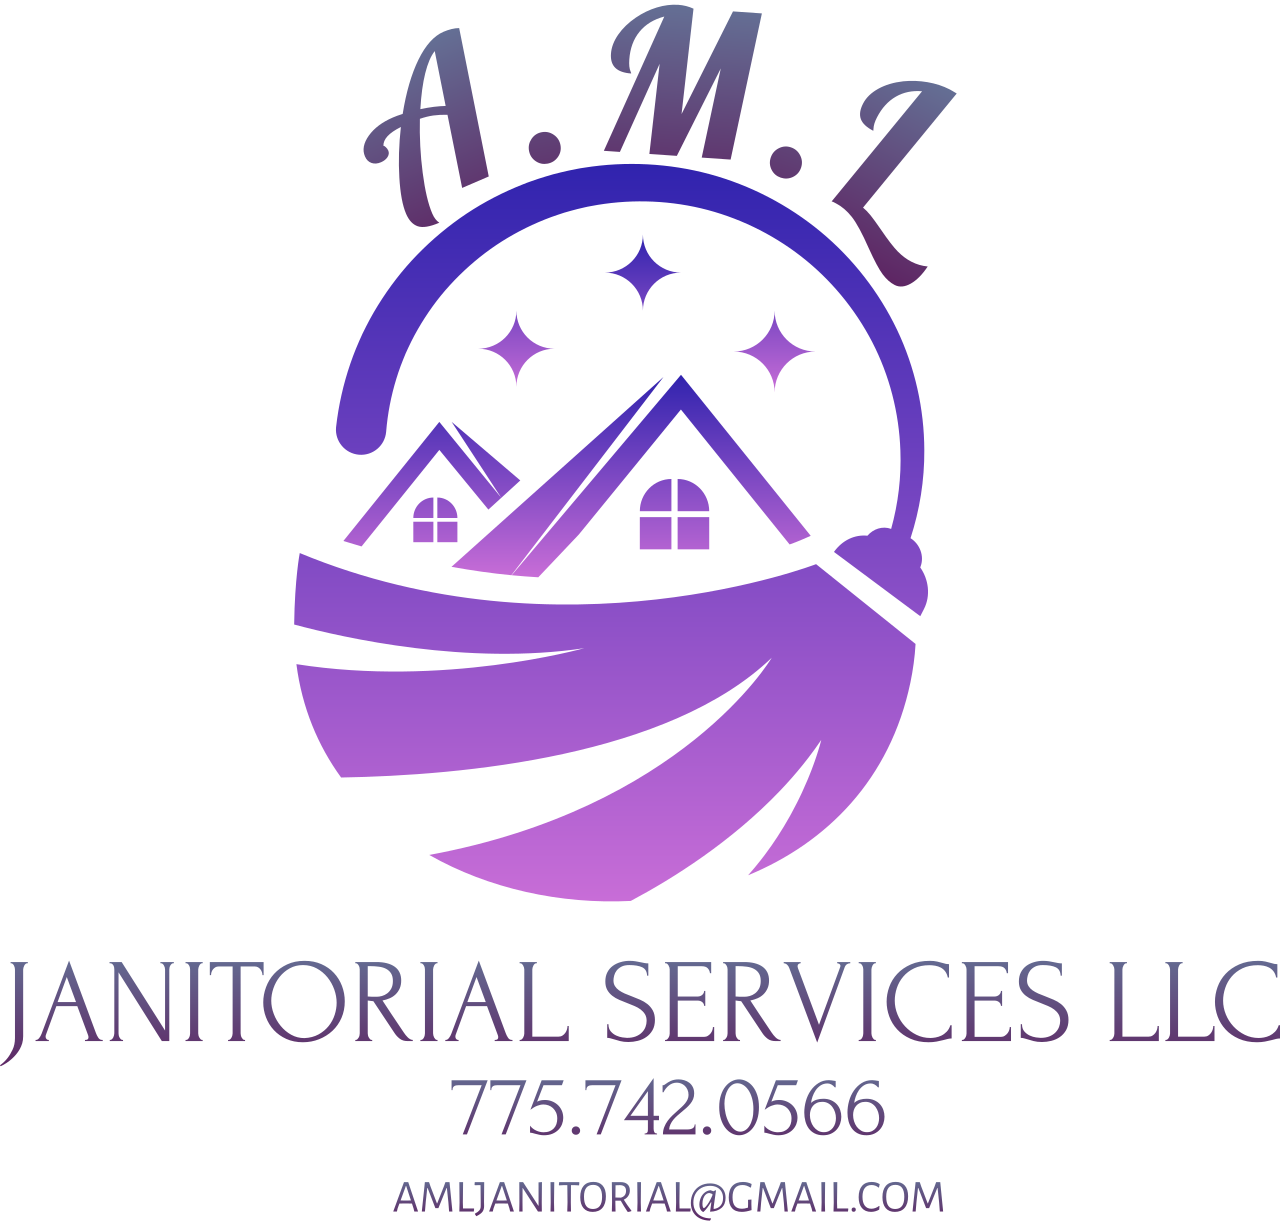 Janitorial Services LLC's logo